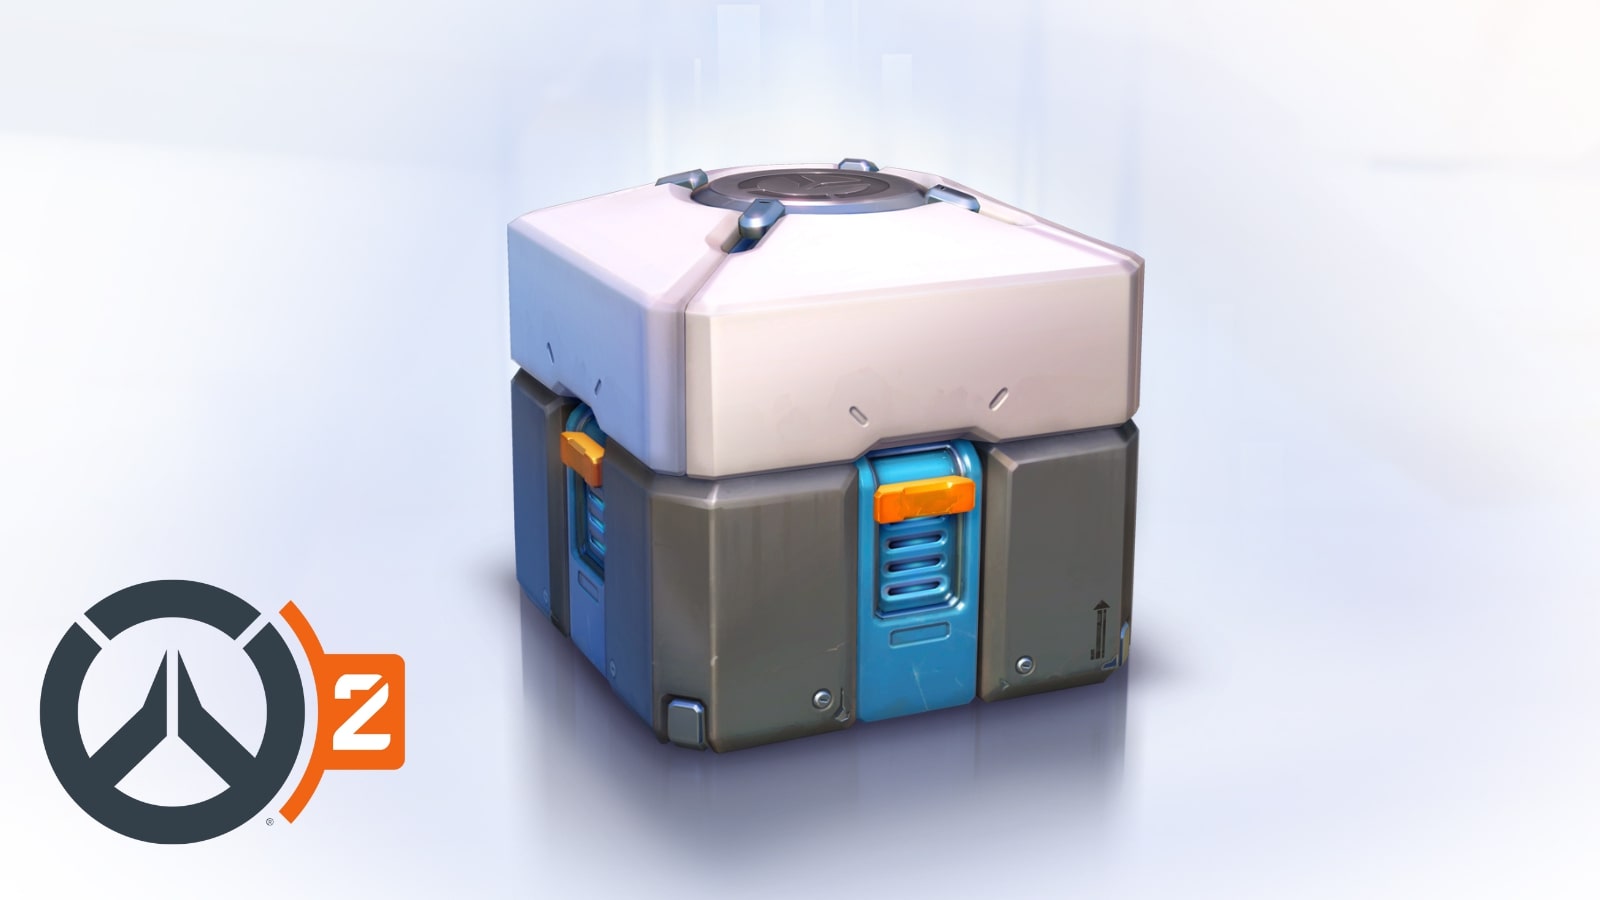 Overwatch 2 Doesn't Have Loot Boxes, But Its Alternative Is Worse